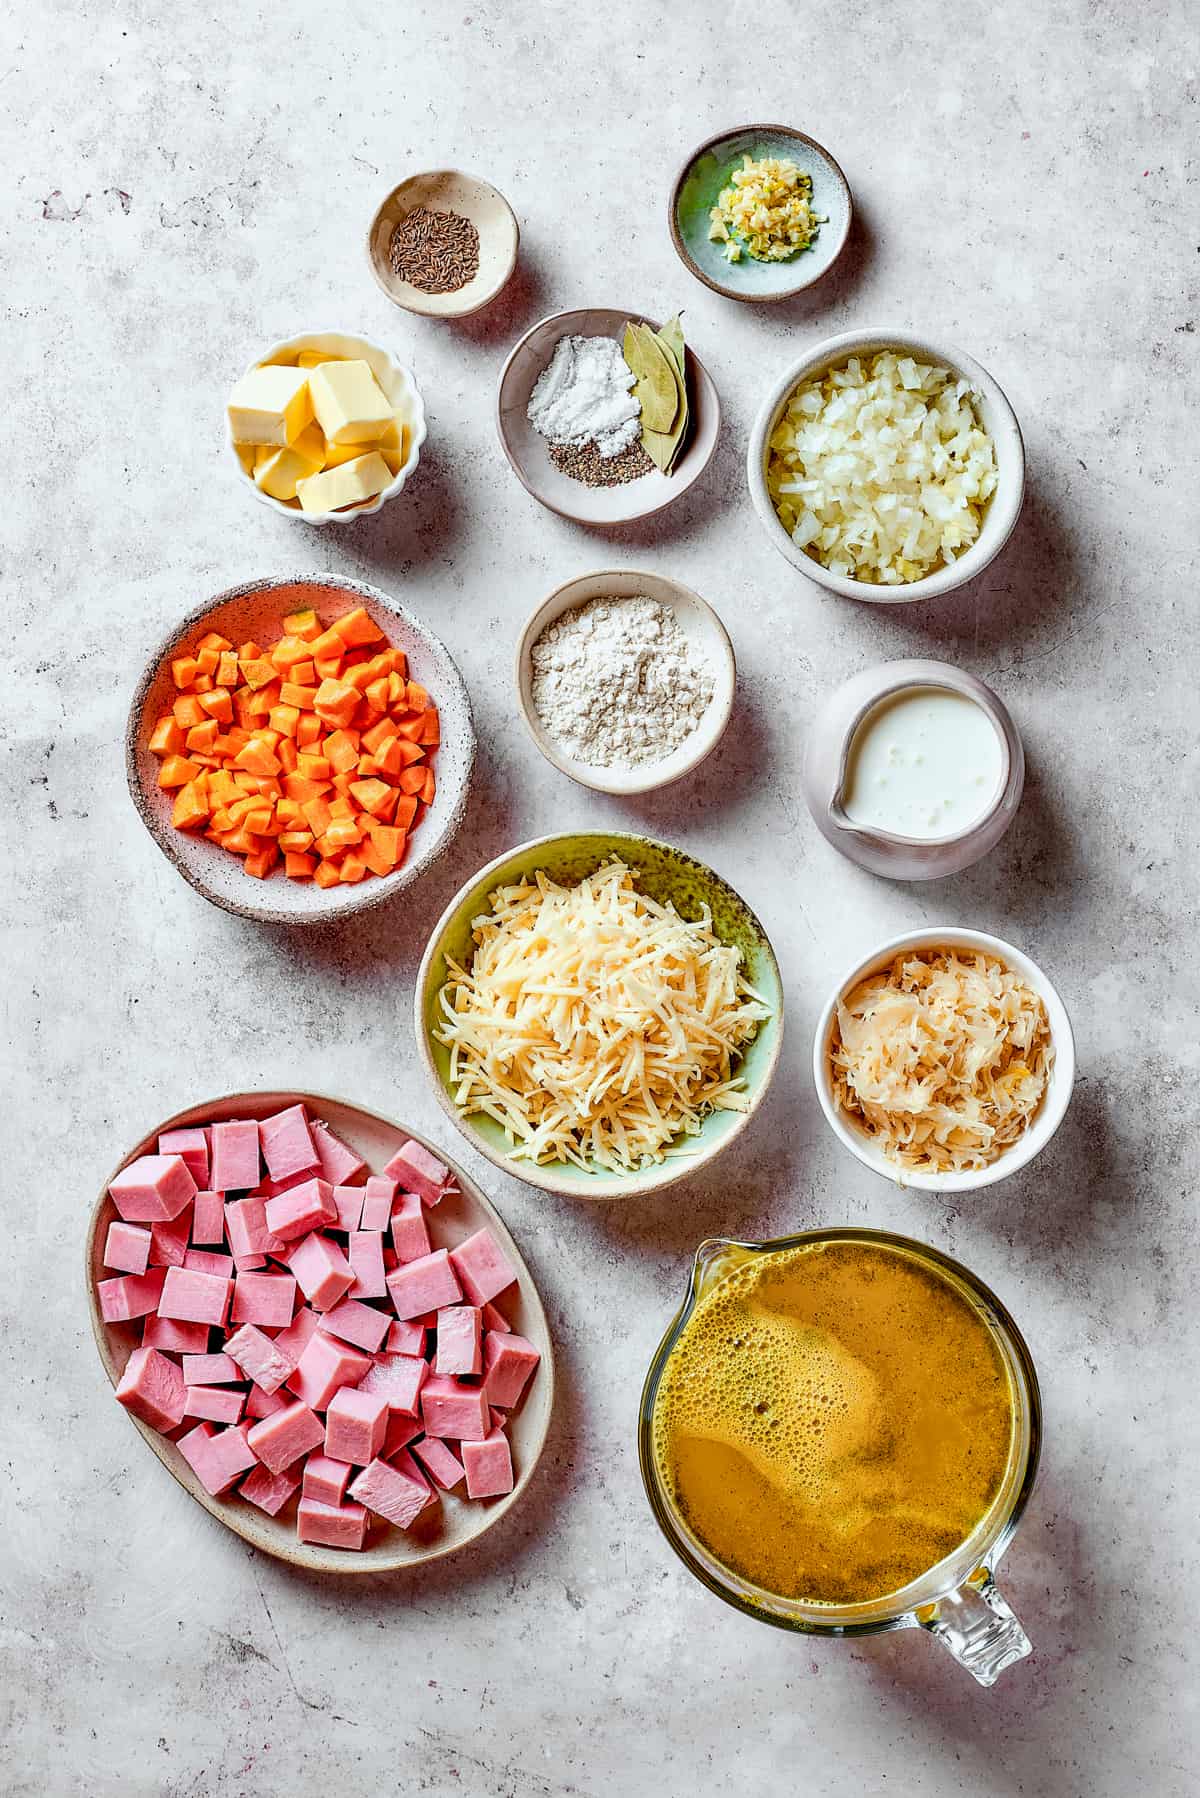 Ingredients for Reuben soup measured and arranged on a table.